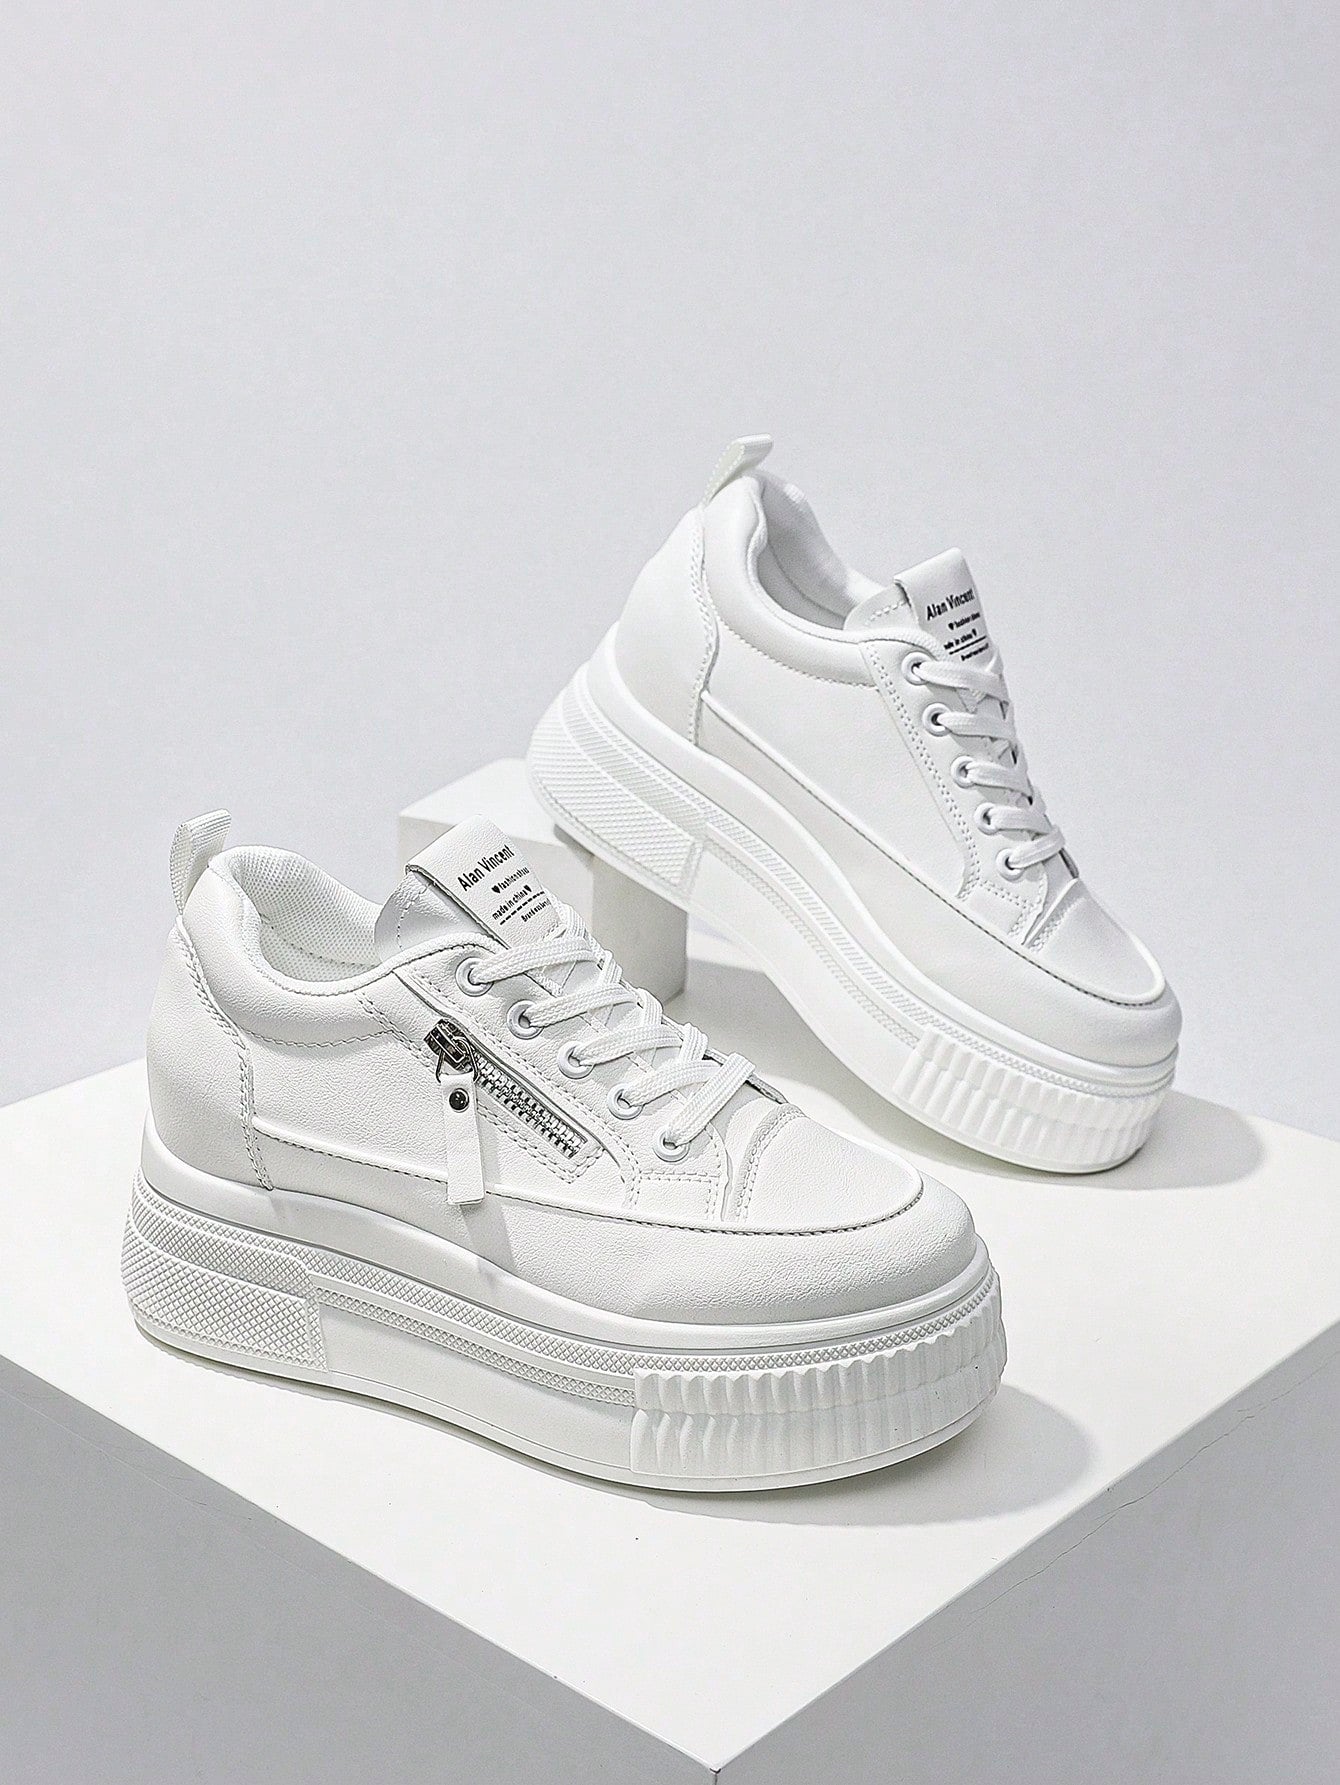 New Style Casual Shoes For Women, Ladies Platform Shoes With  Zipper, White Shoes, Outdoor Comfortable Sneakers, Internal Increase 5cm, Party Shoes, Suitable For Short Women-White-1